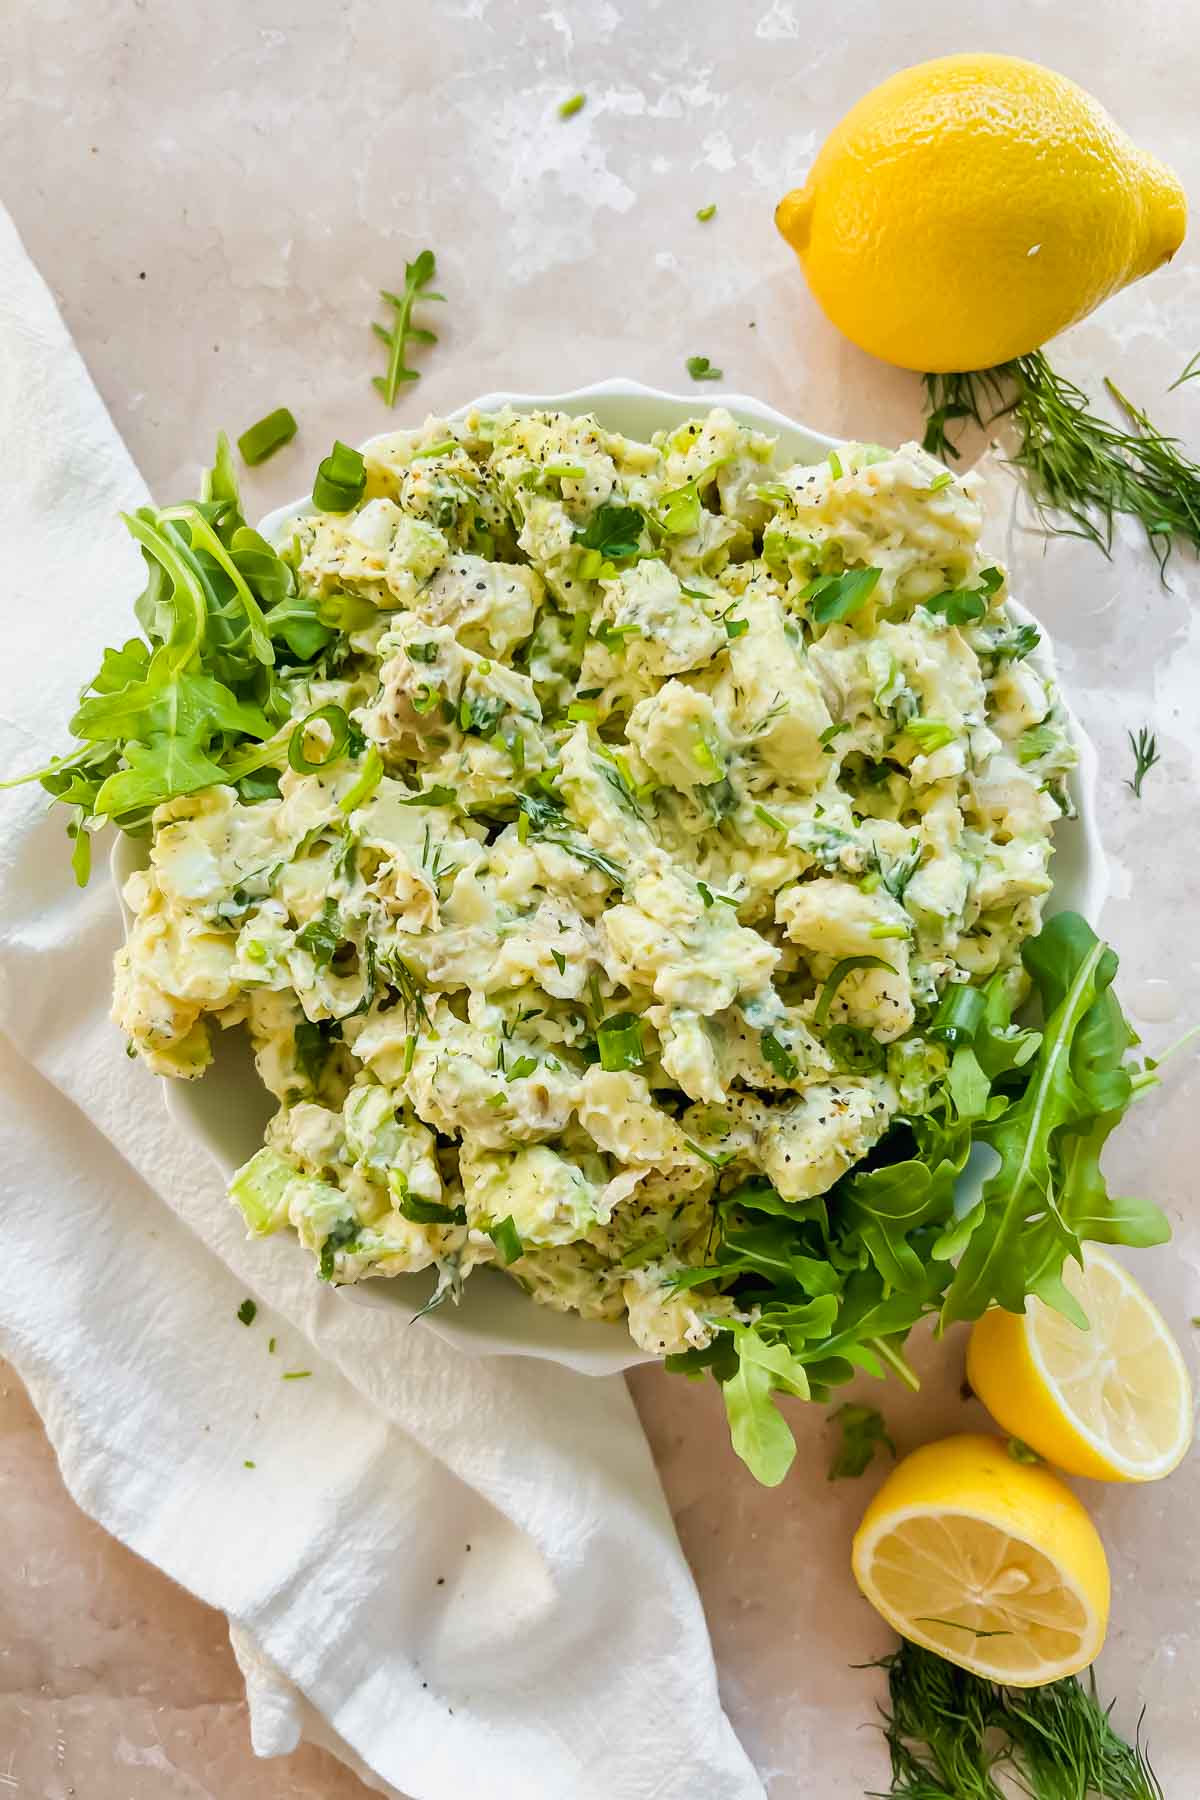 creamy healthy lemon dill potato salad mixed together over arugula in white bowl.